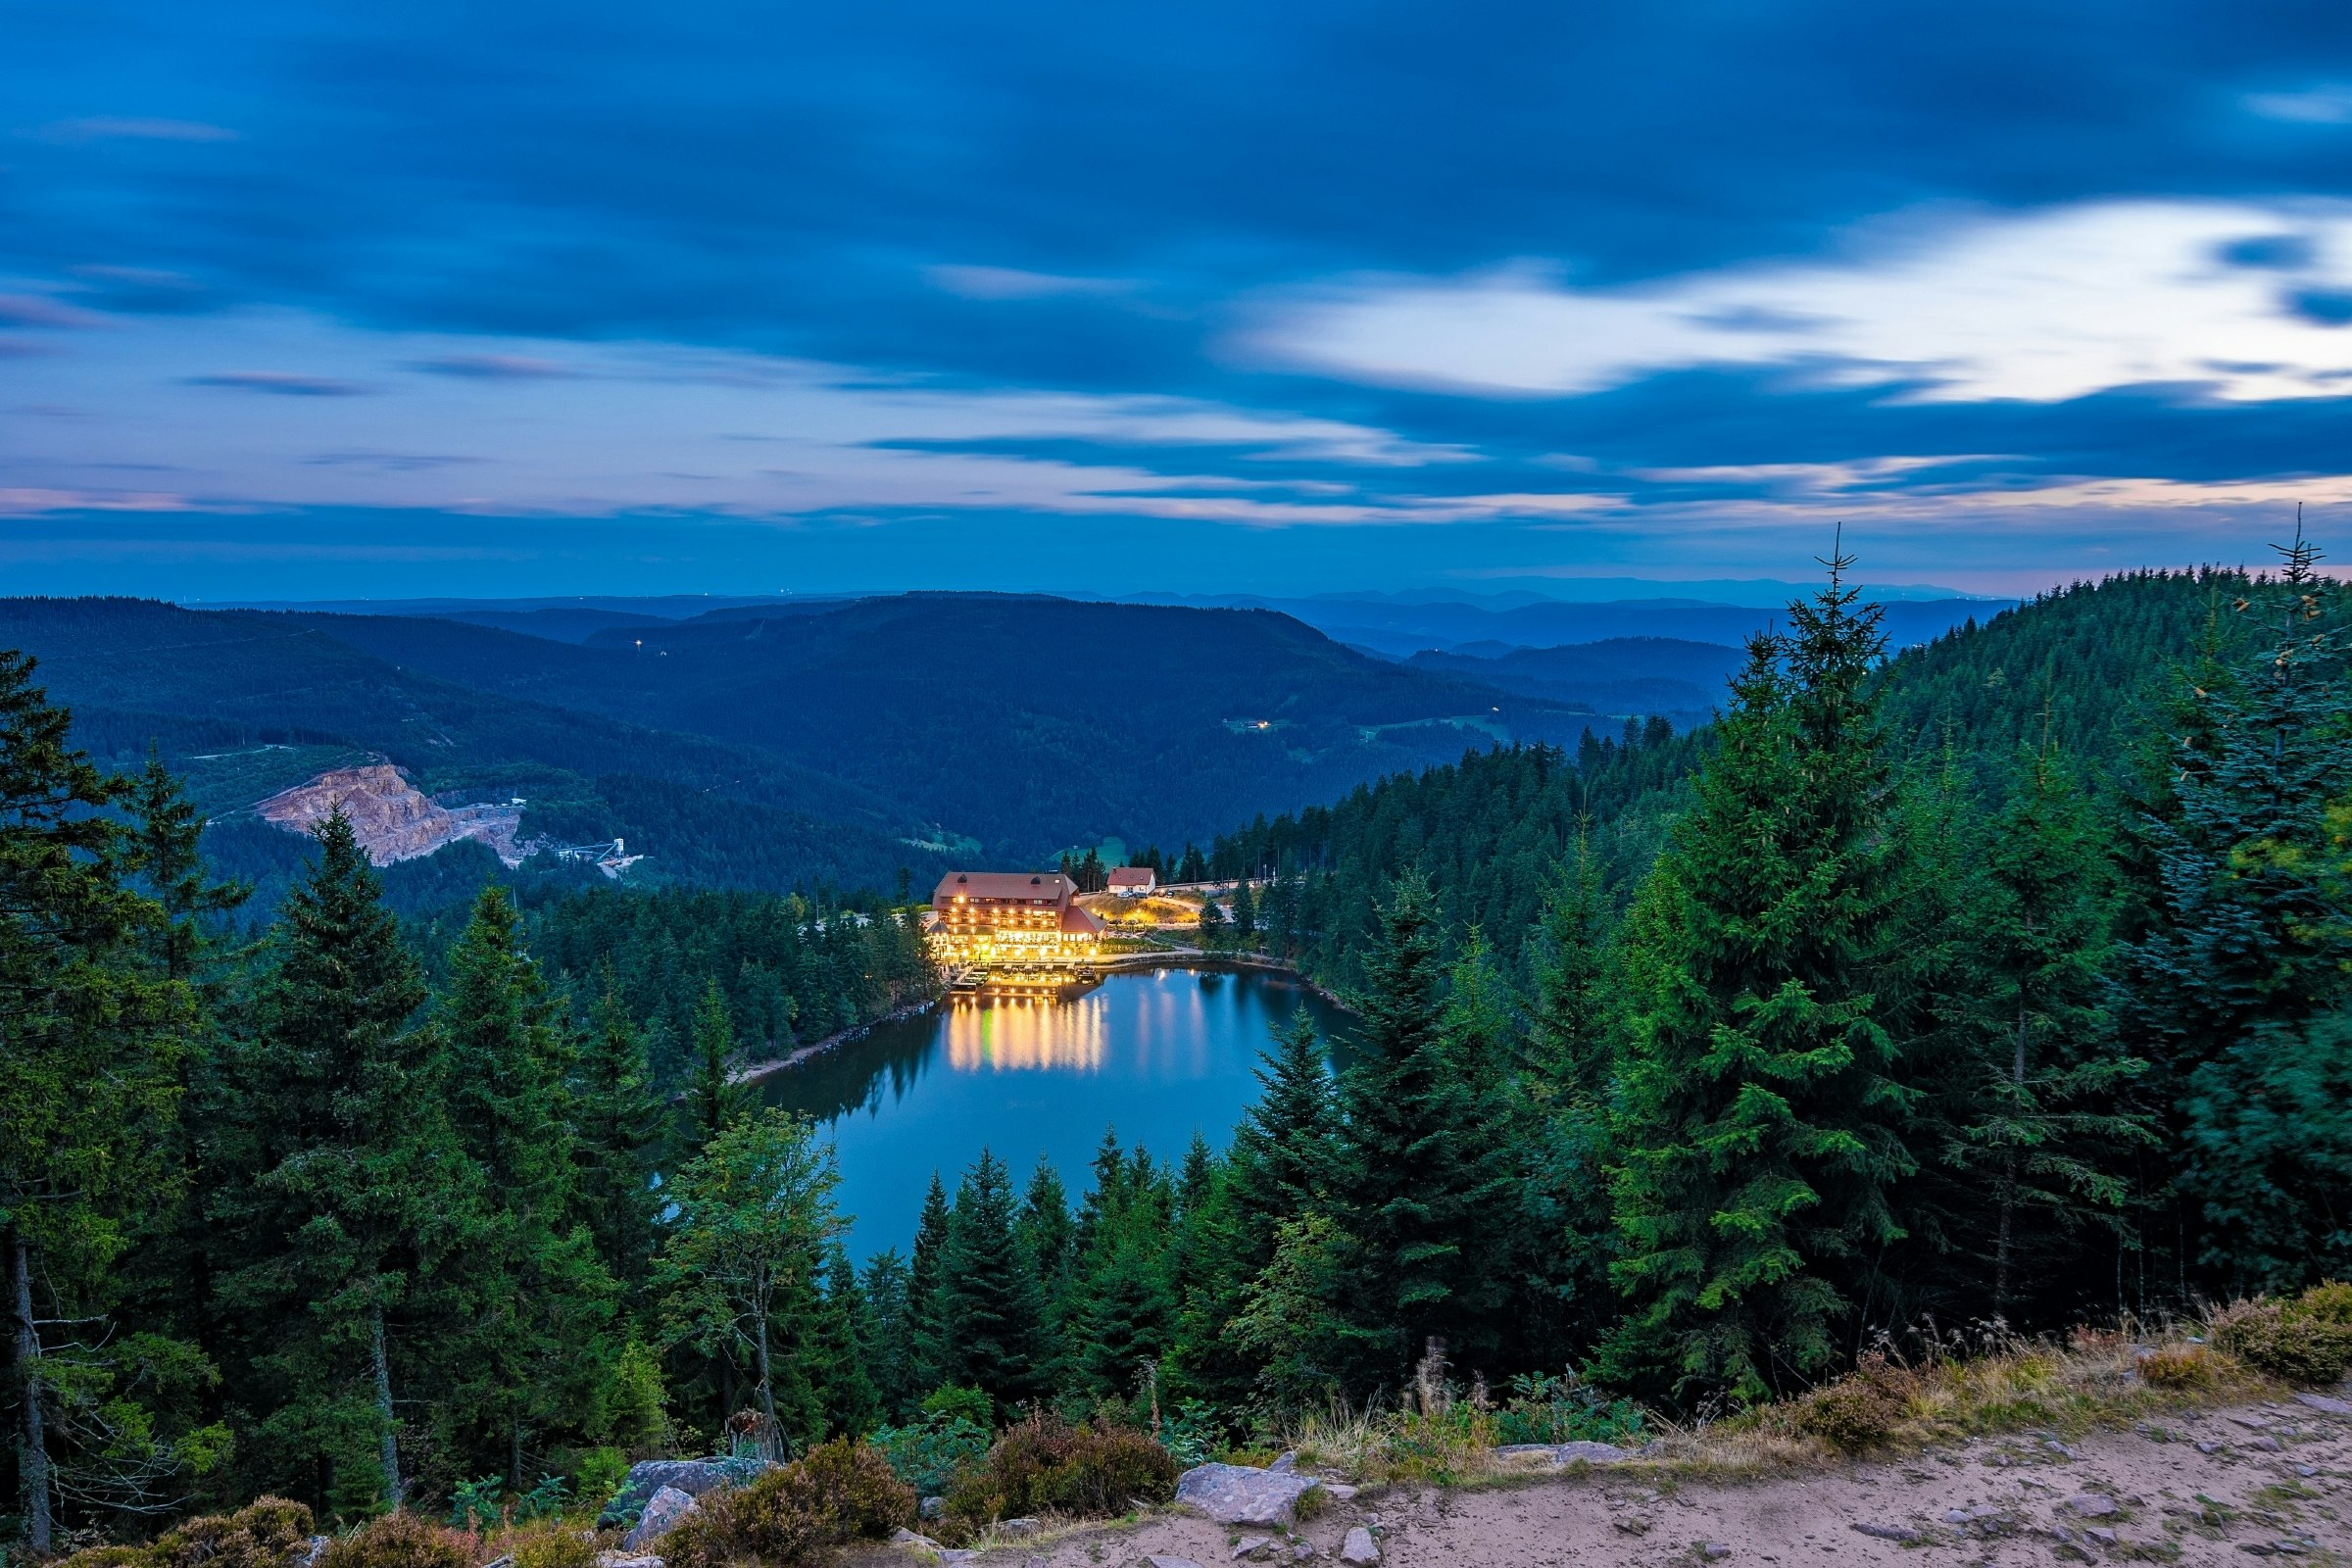 High-angle view of the Mummelsee lake in the Black Forest at night.